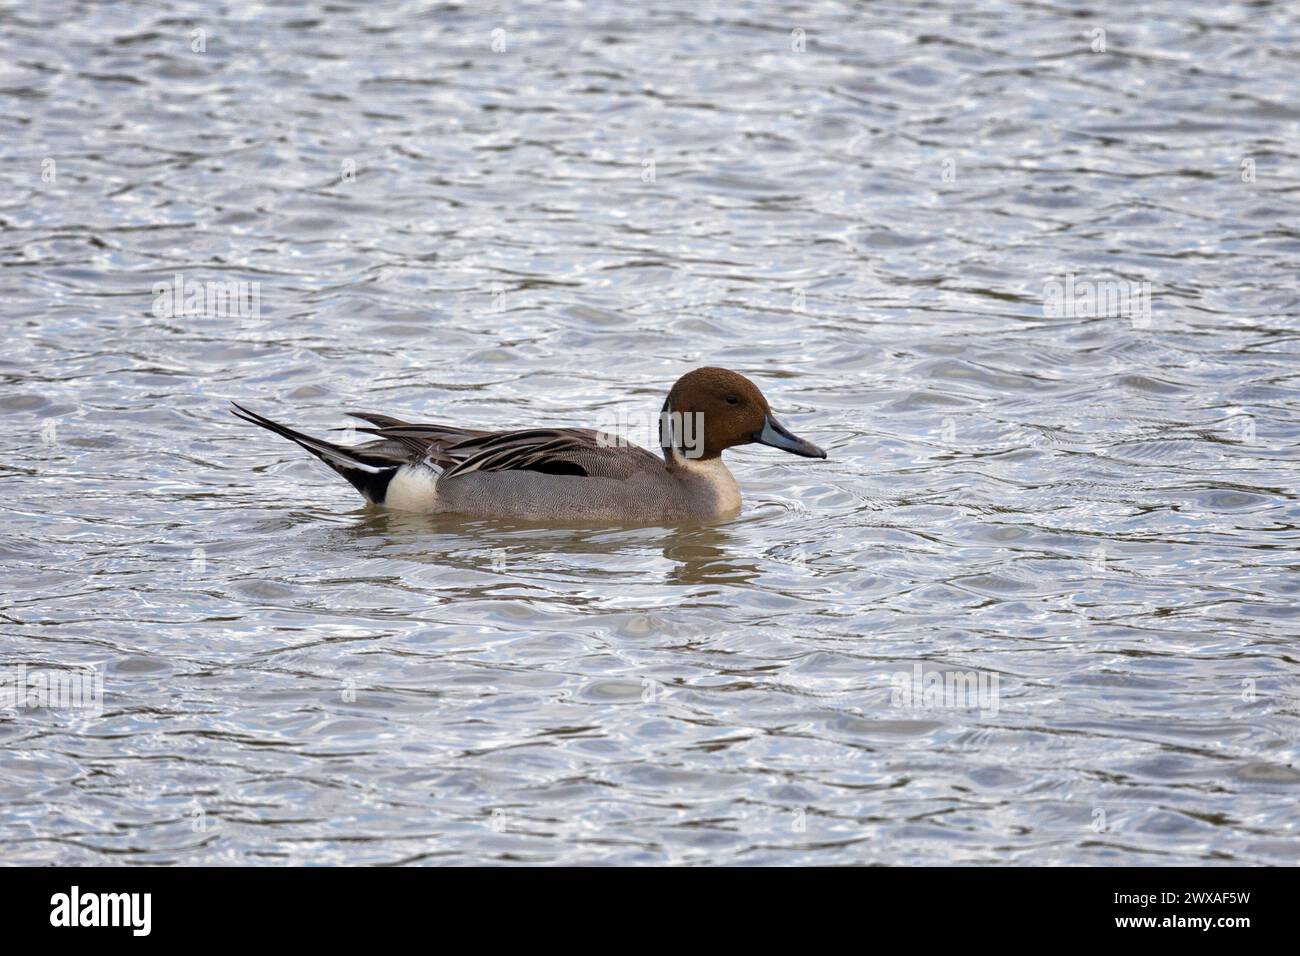 Male Northern pintail swimming on water Stock Photo